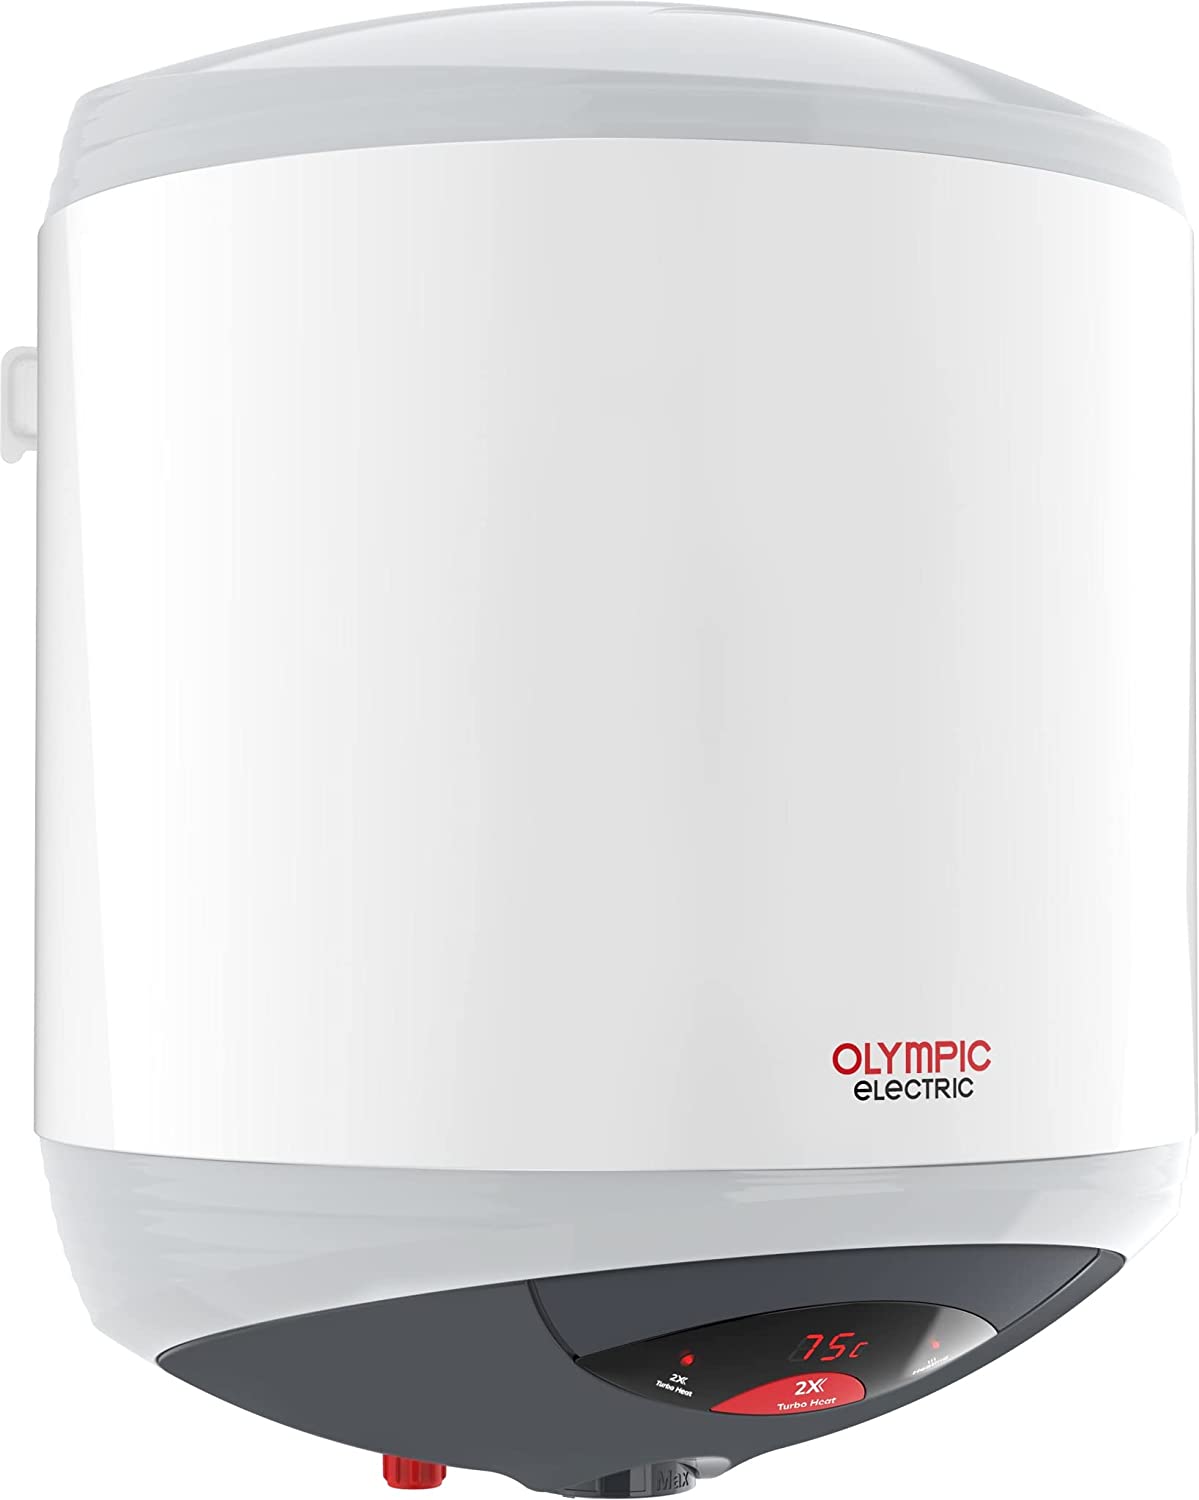 Electric Water Heater Olympic TURBO with knob 80 Liter Ename